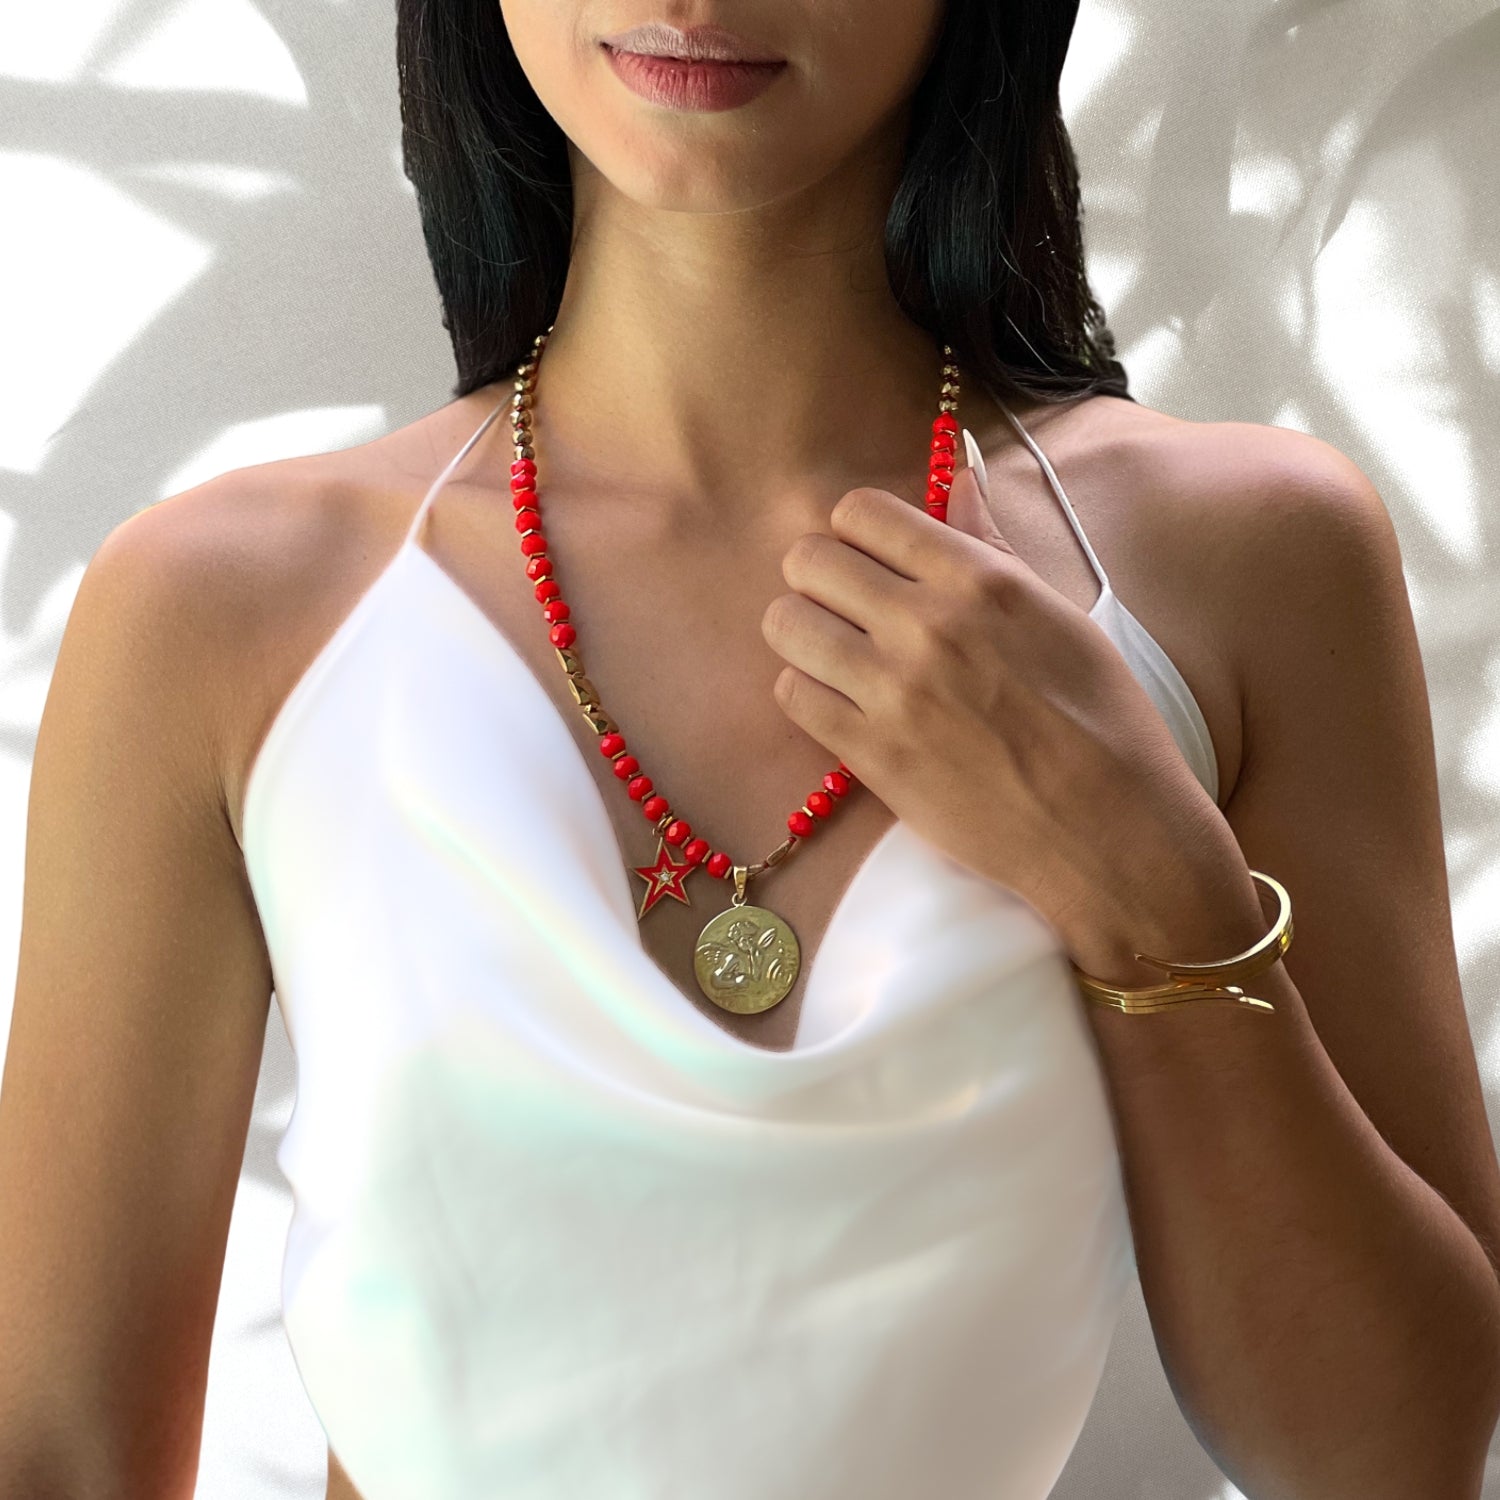 Model wearing the Angel Protector Necklace, a stunning accessory that reminds us we are never alone